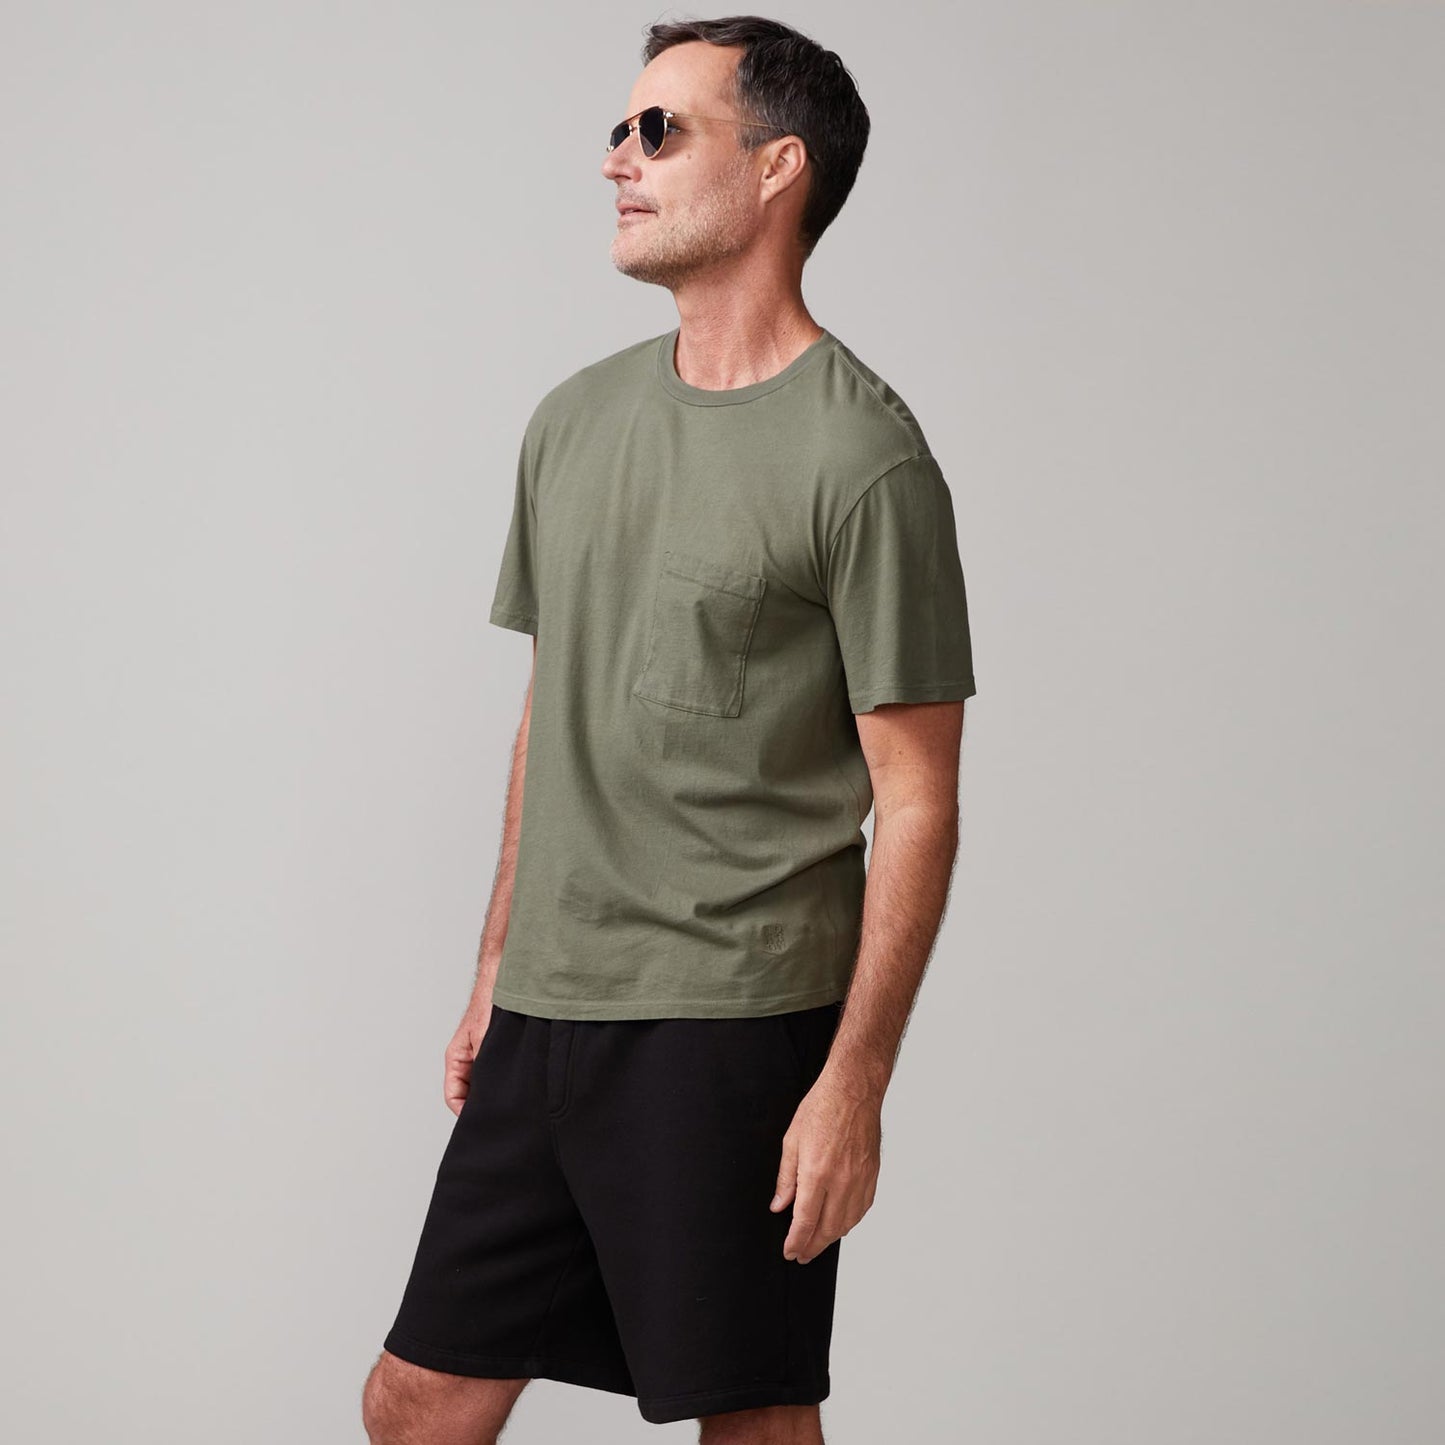 Side view of model wearing the relaxed pocket crew in general green.